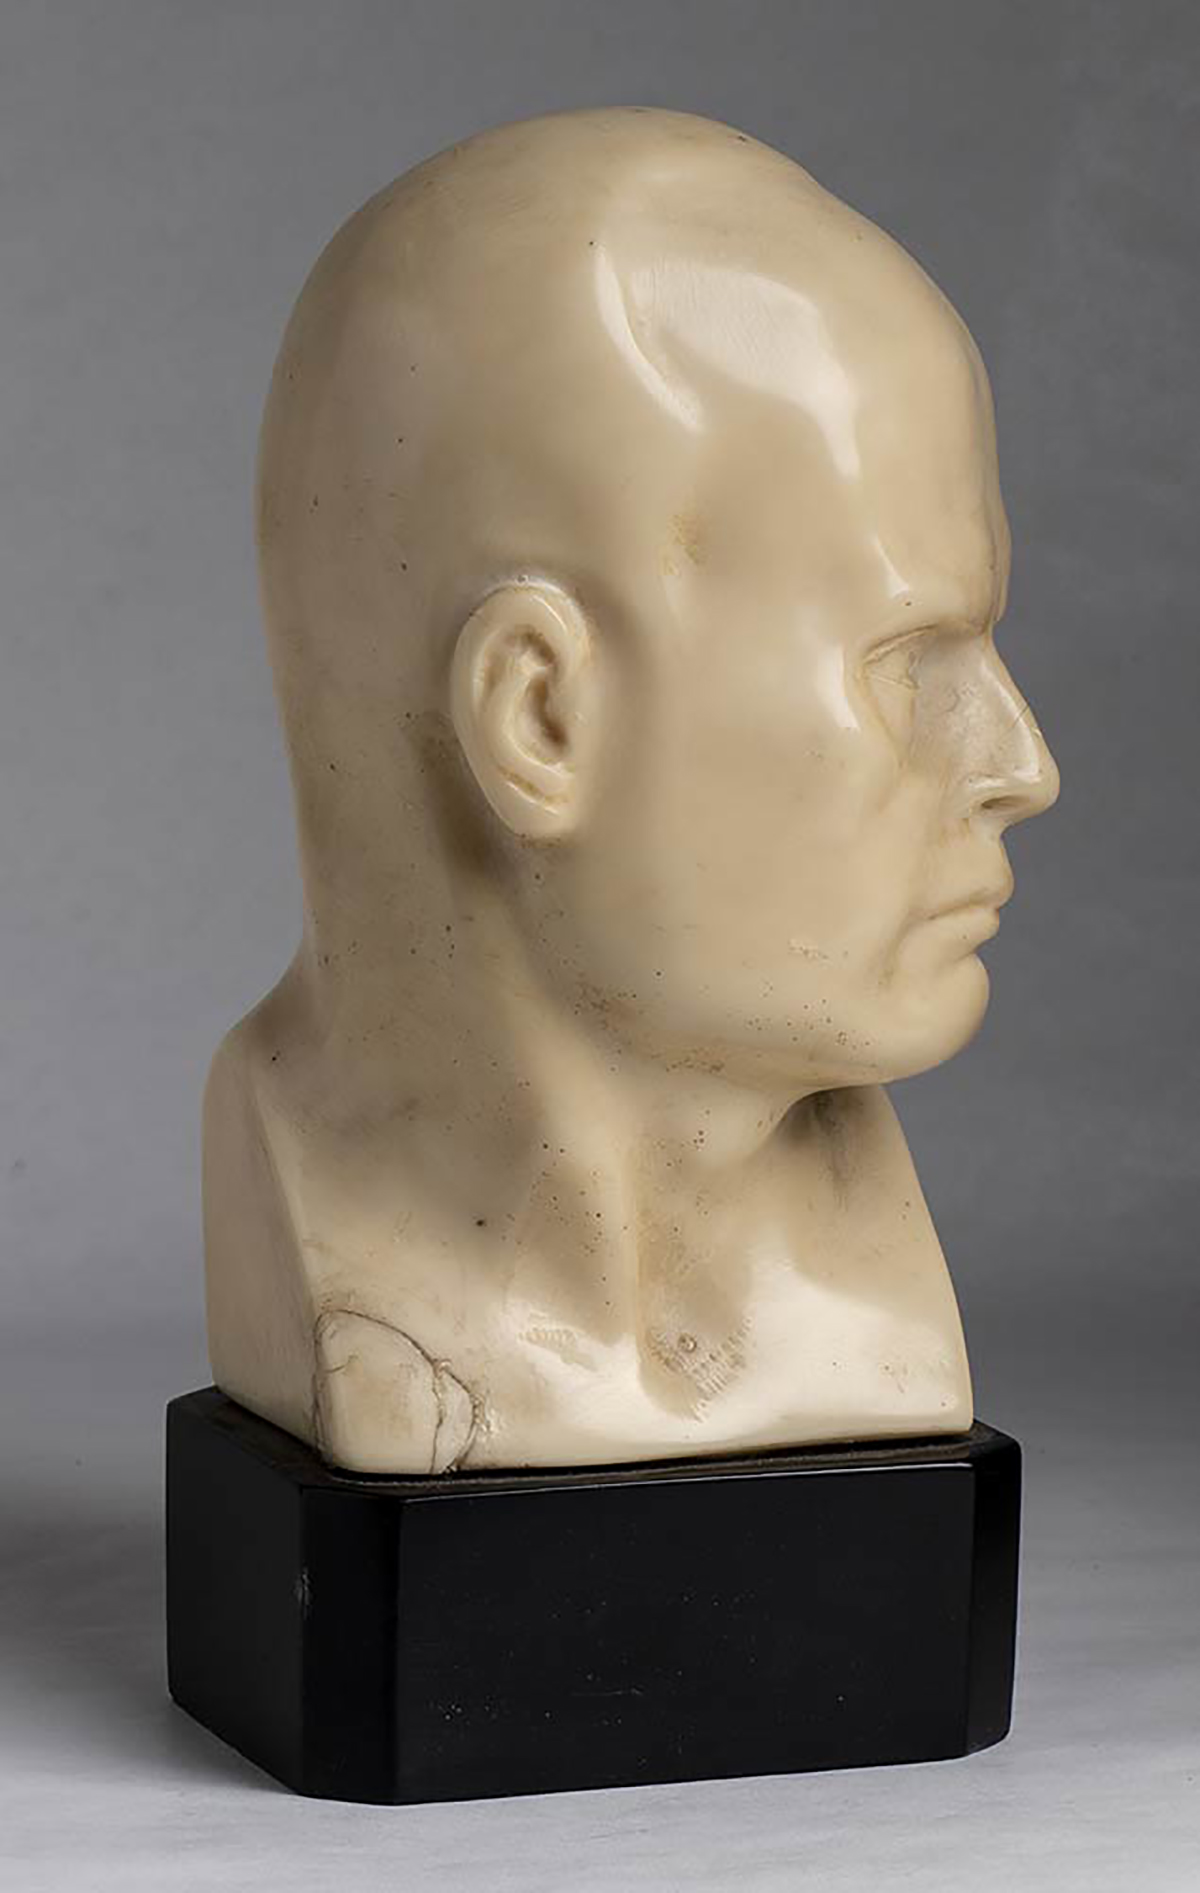 A small Benito Mussolini head, ivory paste ivory paste A small Benito Mussolini’s head, ivory paste, - Image 2 of 4